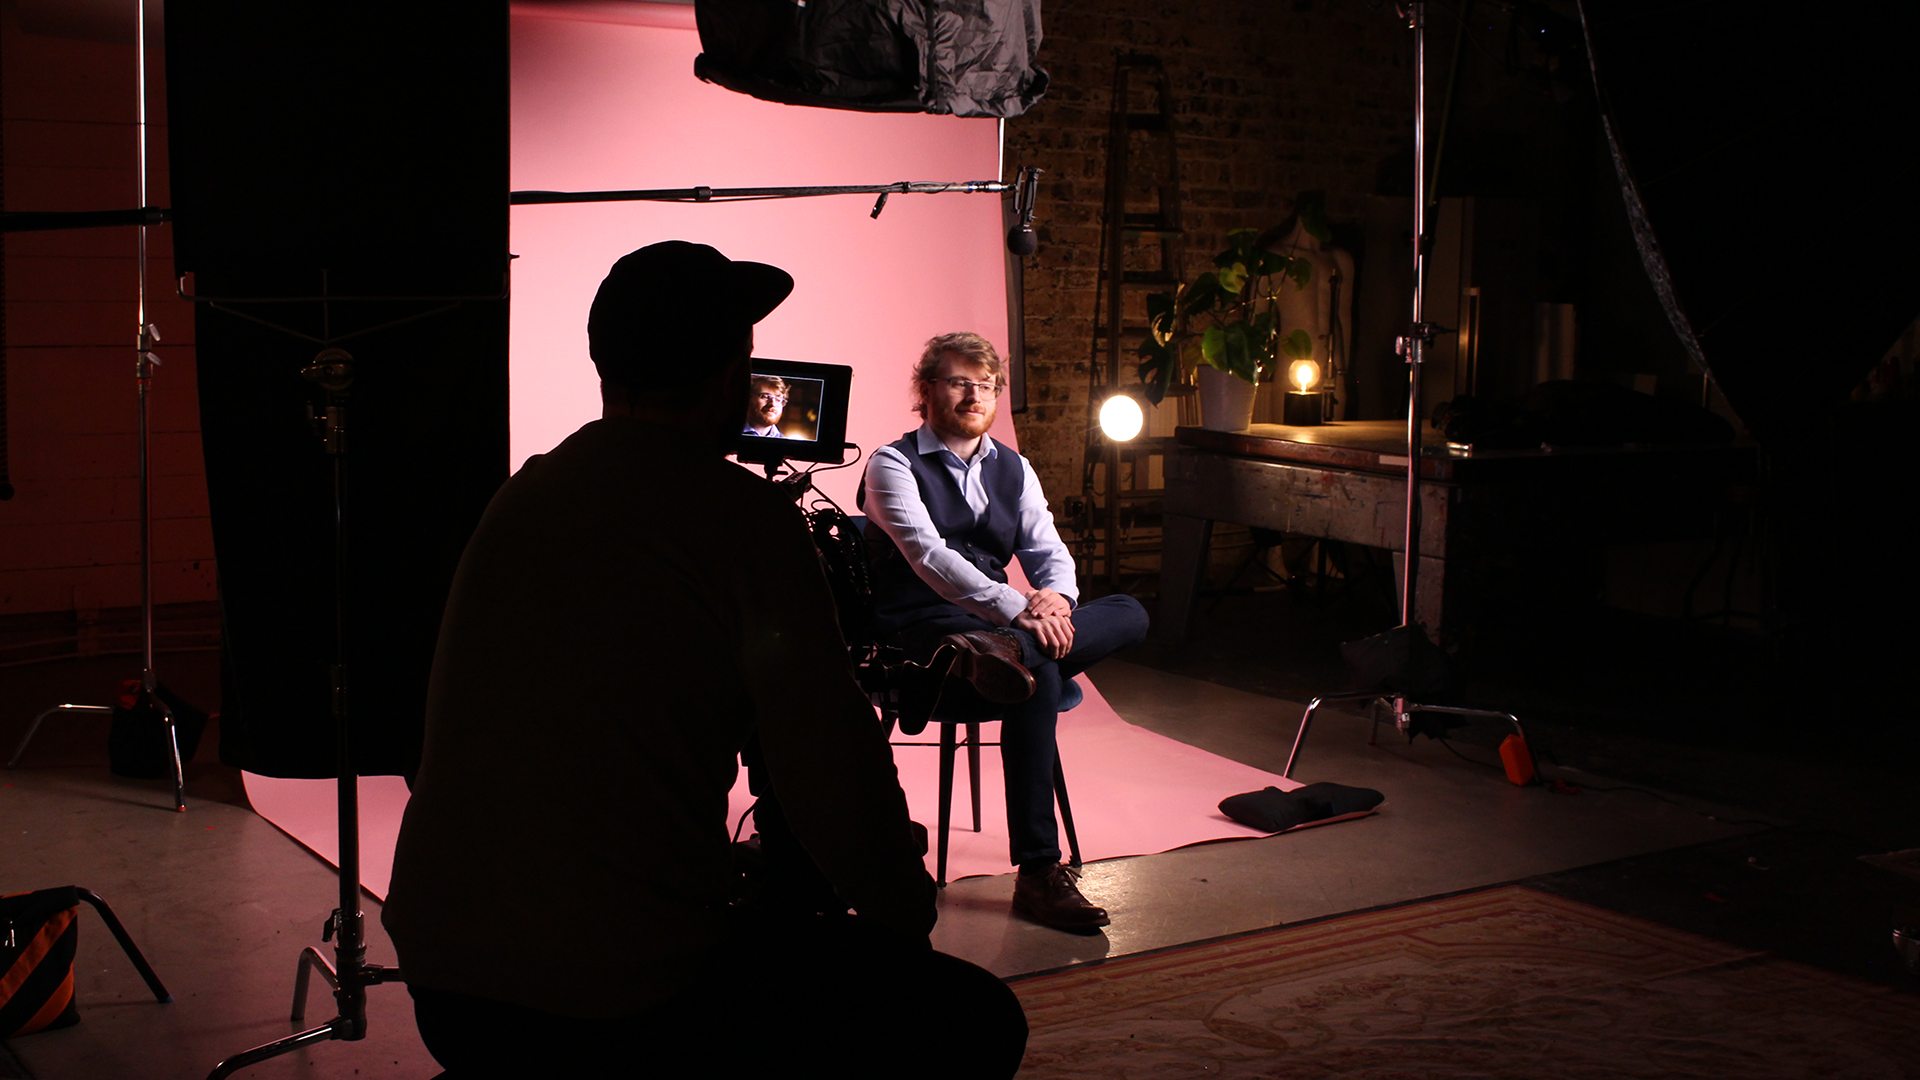 Still of Jonathan Mullen in Working Differently, credit: The Portal Studios. Jonathan sits on a chair against a pink background, with a man holding a camera filming him, with his back to the camera.